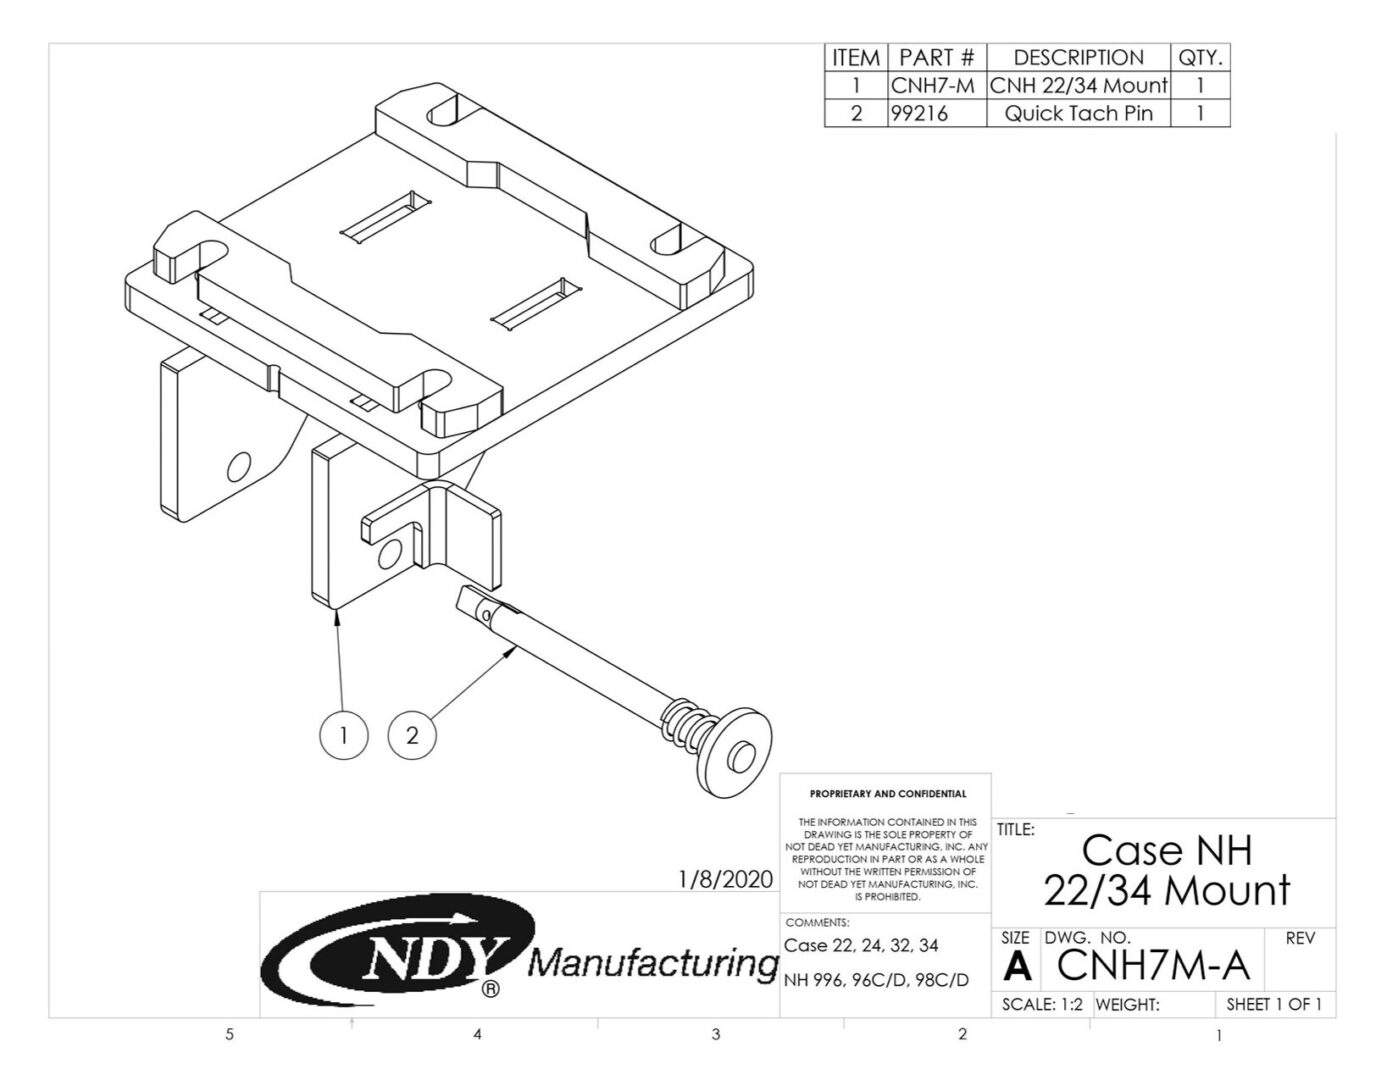 A drawing of a Stalk Stomper Universal Mount Assembly for Case IH 2200, 2400, 3200, 3400 Series and New Holland 996, 96C/D, 98C/D Series Corn Head for a machine.